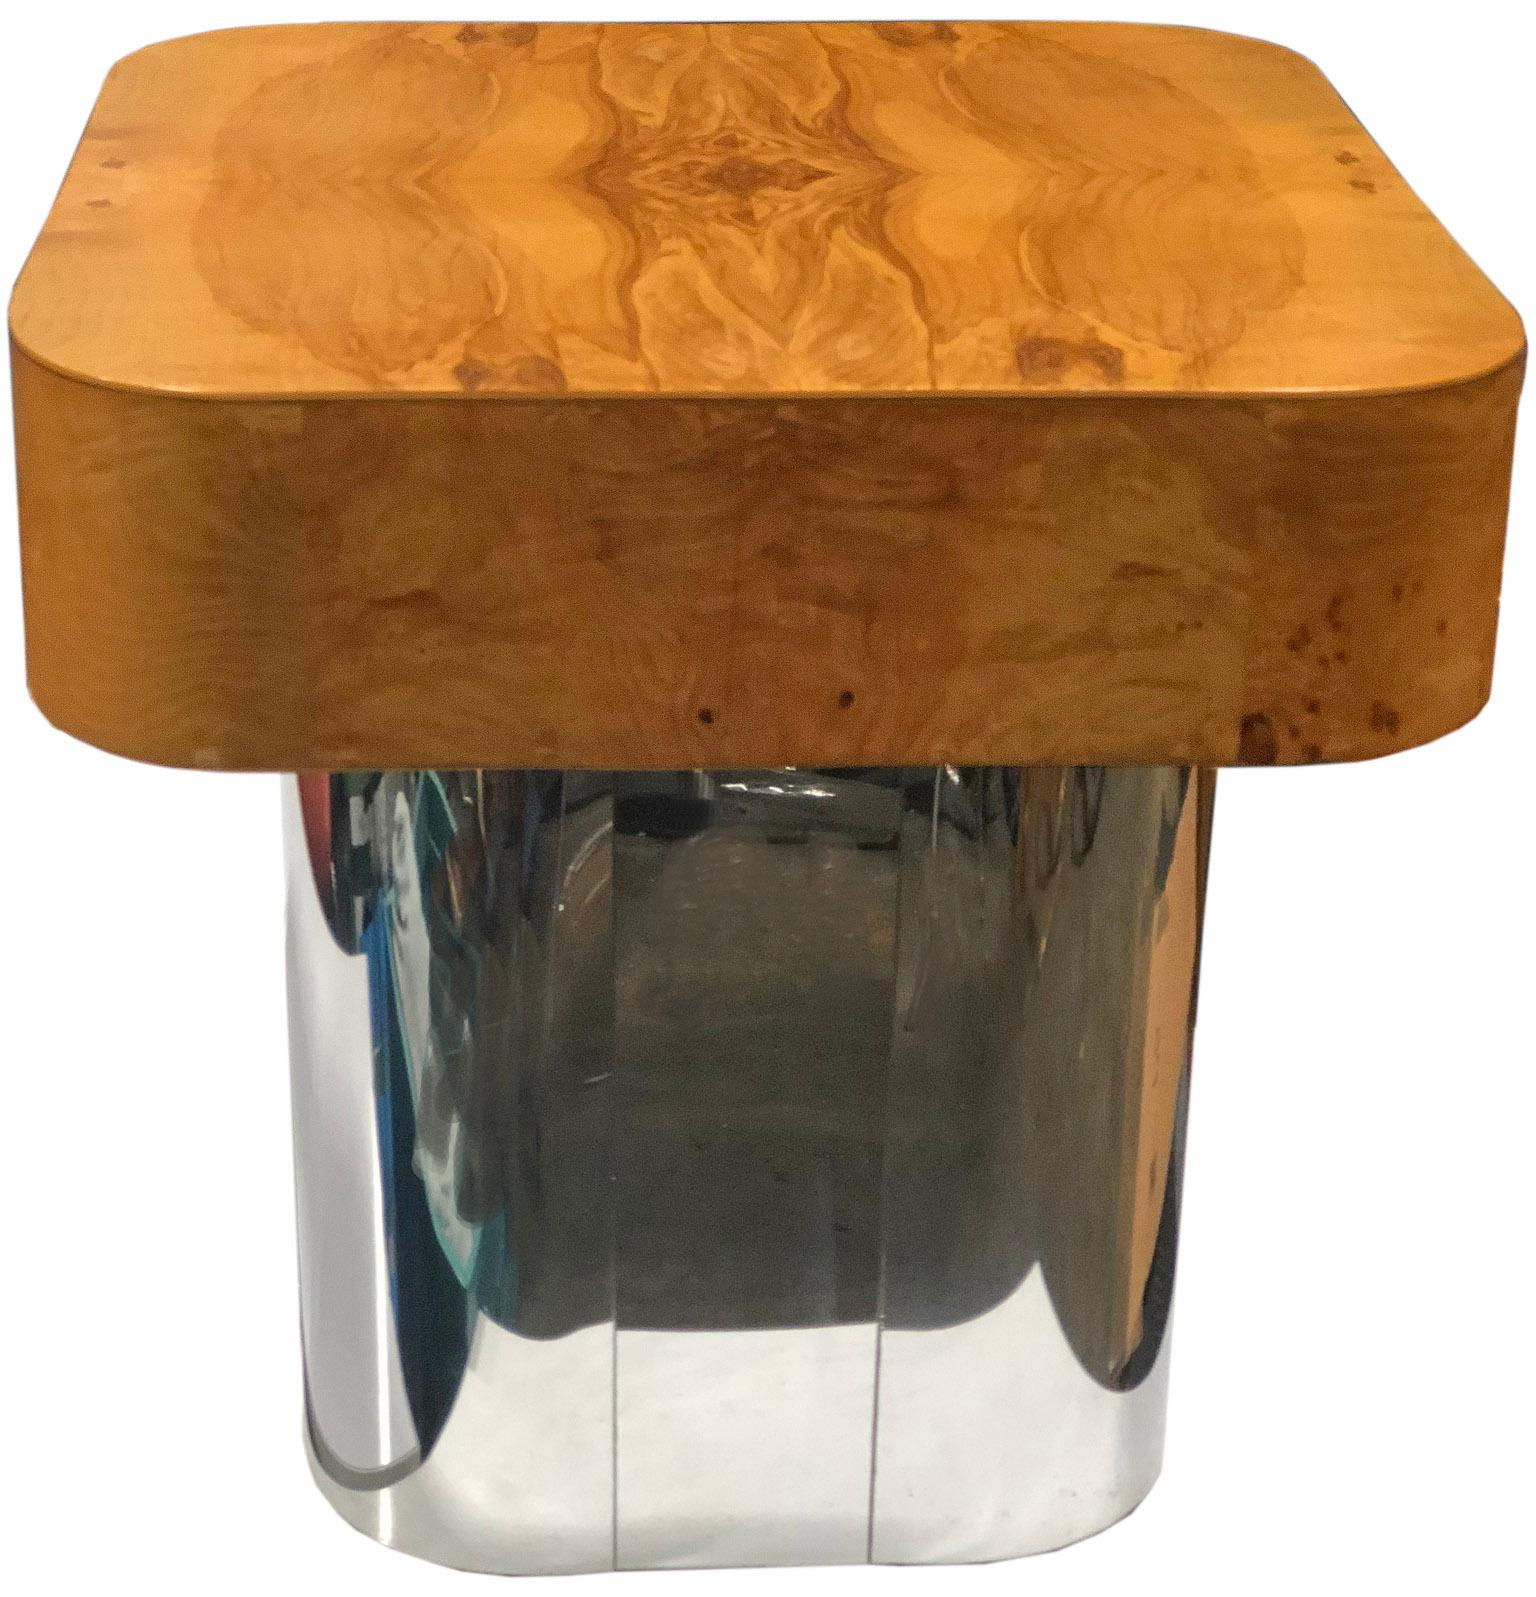 For your consideration is this wonderful side table comprised of polished steel and burl wood. Purchased directly from the original owner who had a large collection of Paul Evans and Milo Baughman designs.